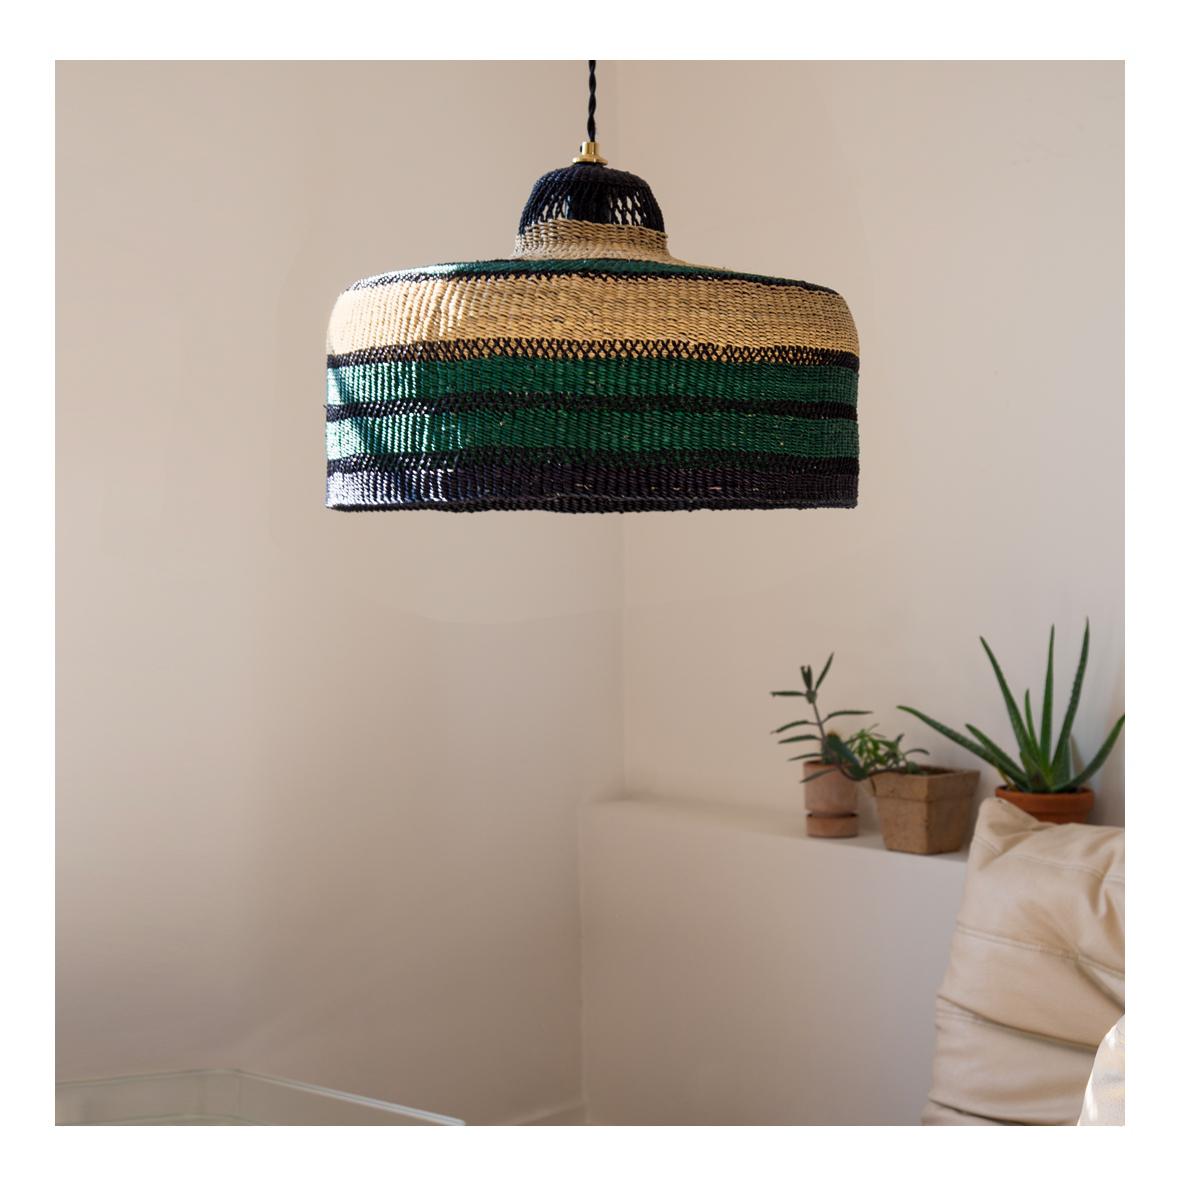 Medium woven pendant lamp high life m : 
Nature in green and black
Colour: Herb (bottle green)

Are you looking for a medium size lamp to jazz up a room? Your room will be brimming with light when you illume this black, green and natural pendant